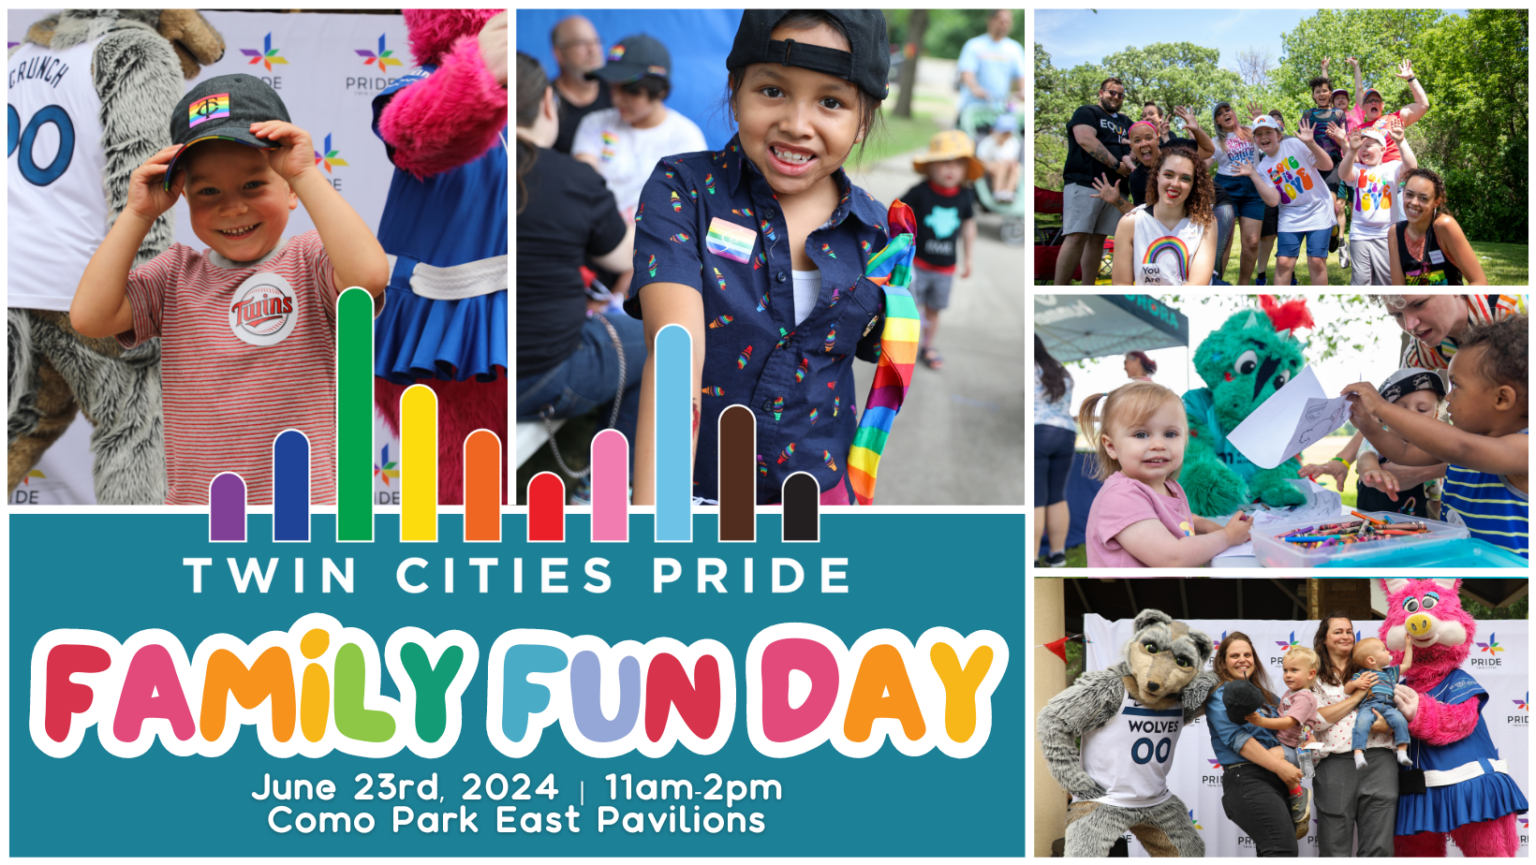 collage of images of kids and families attending Family Fun day with the text "Twin Cities Pride Family Fun Day, June 23rd, 2024, 11am-2pm, Como Park East Pavilion